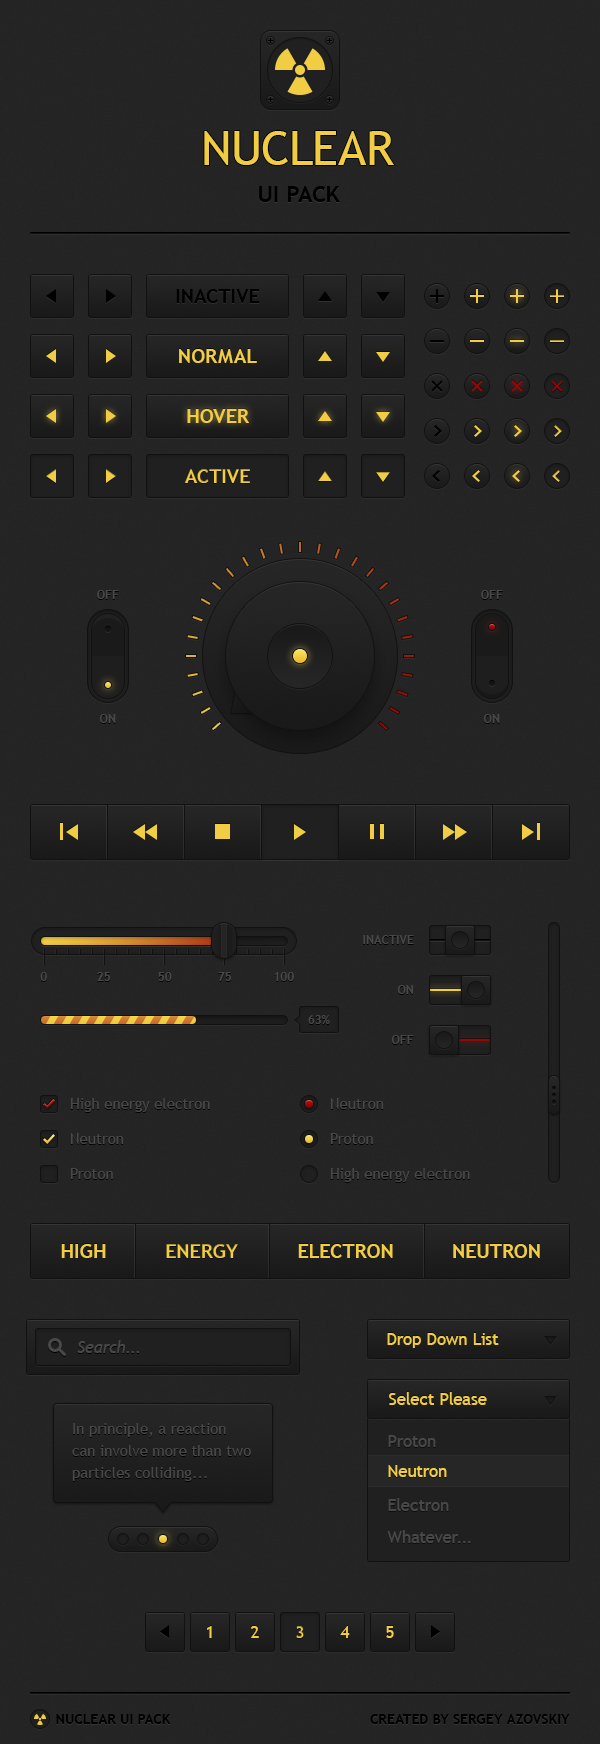 UI ux user interface elements components Interface ui pack ui kit psd